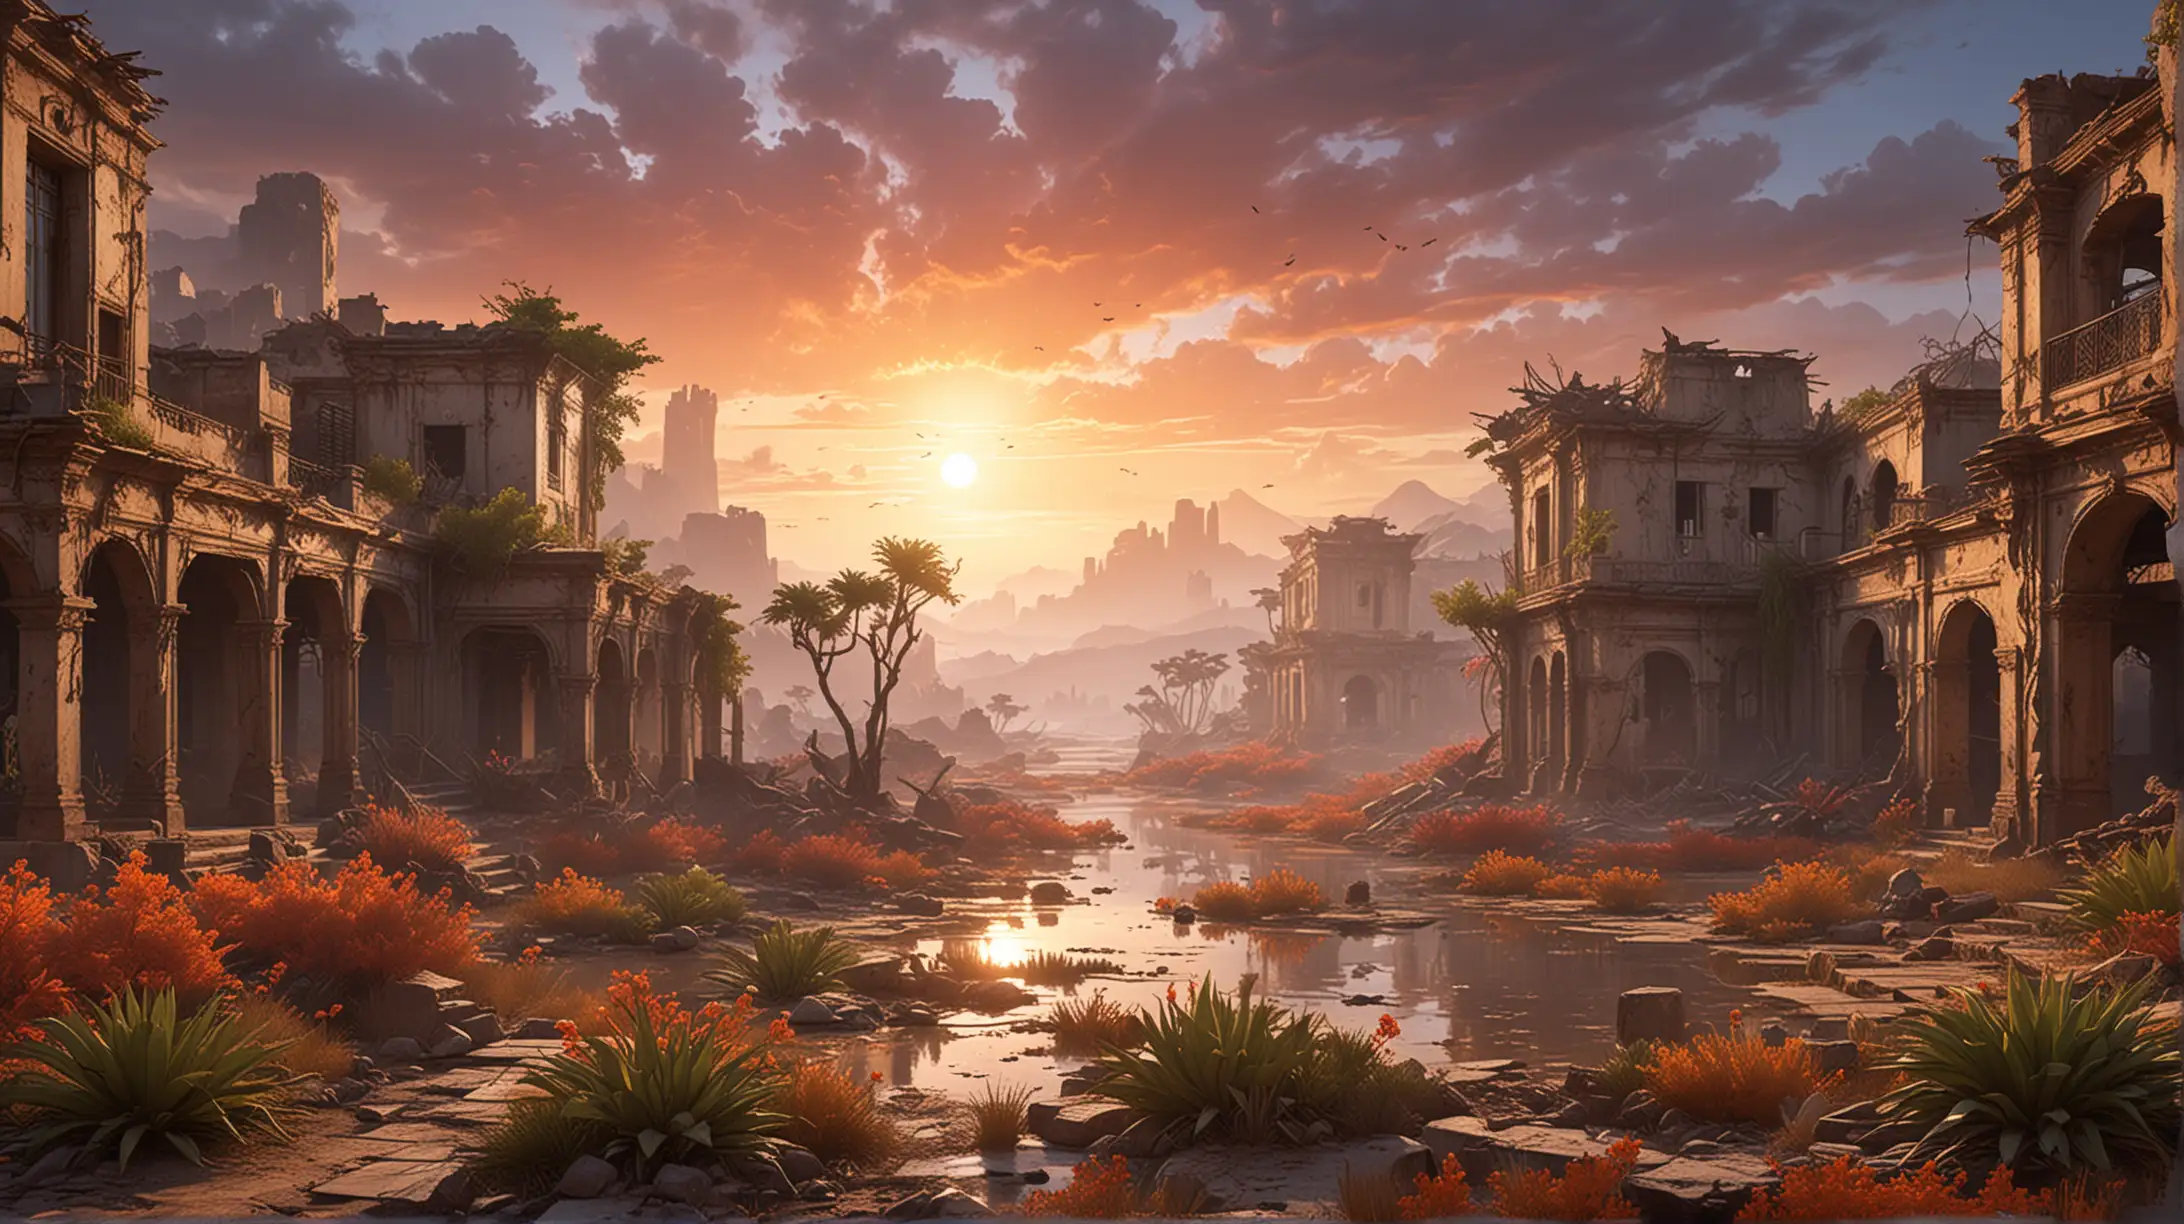 Drawing inspiration from Horizon Forbidden West, the environment is a visual feast of contrasting landscapes. Vibrant flora reclaim abandoned urban sprawls, while majestic wildlife roams amidst the ruins. Dynamic weather systems further enhance the immersive experience, from scorching sunsets to torrential downpours that breathe life into the parched earth.